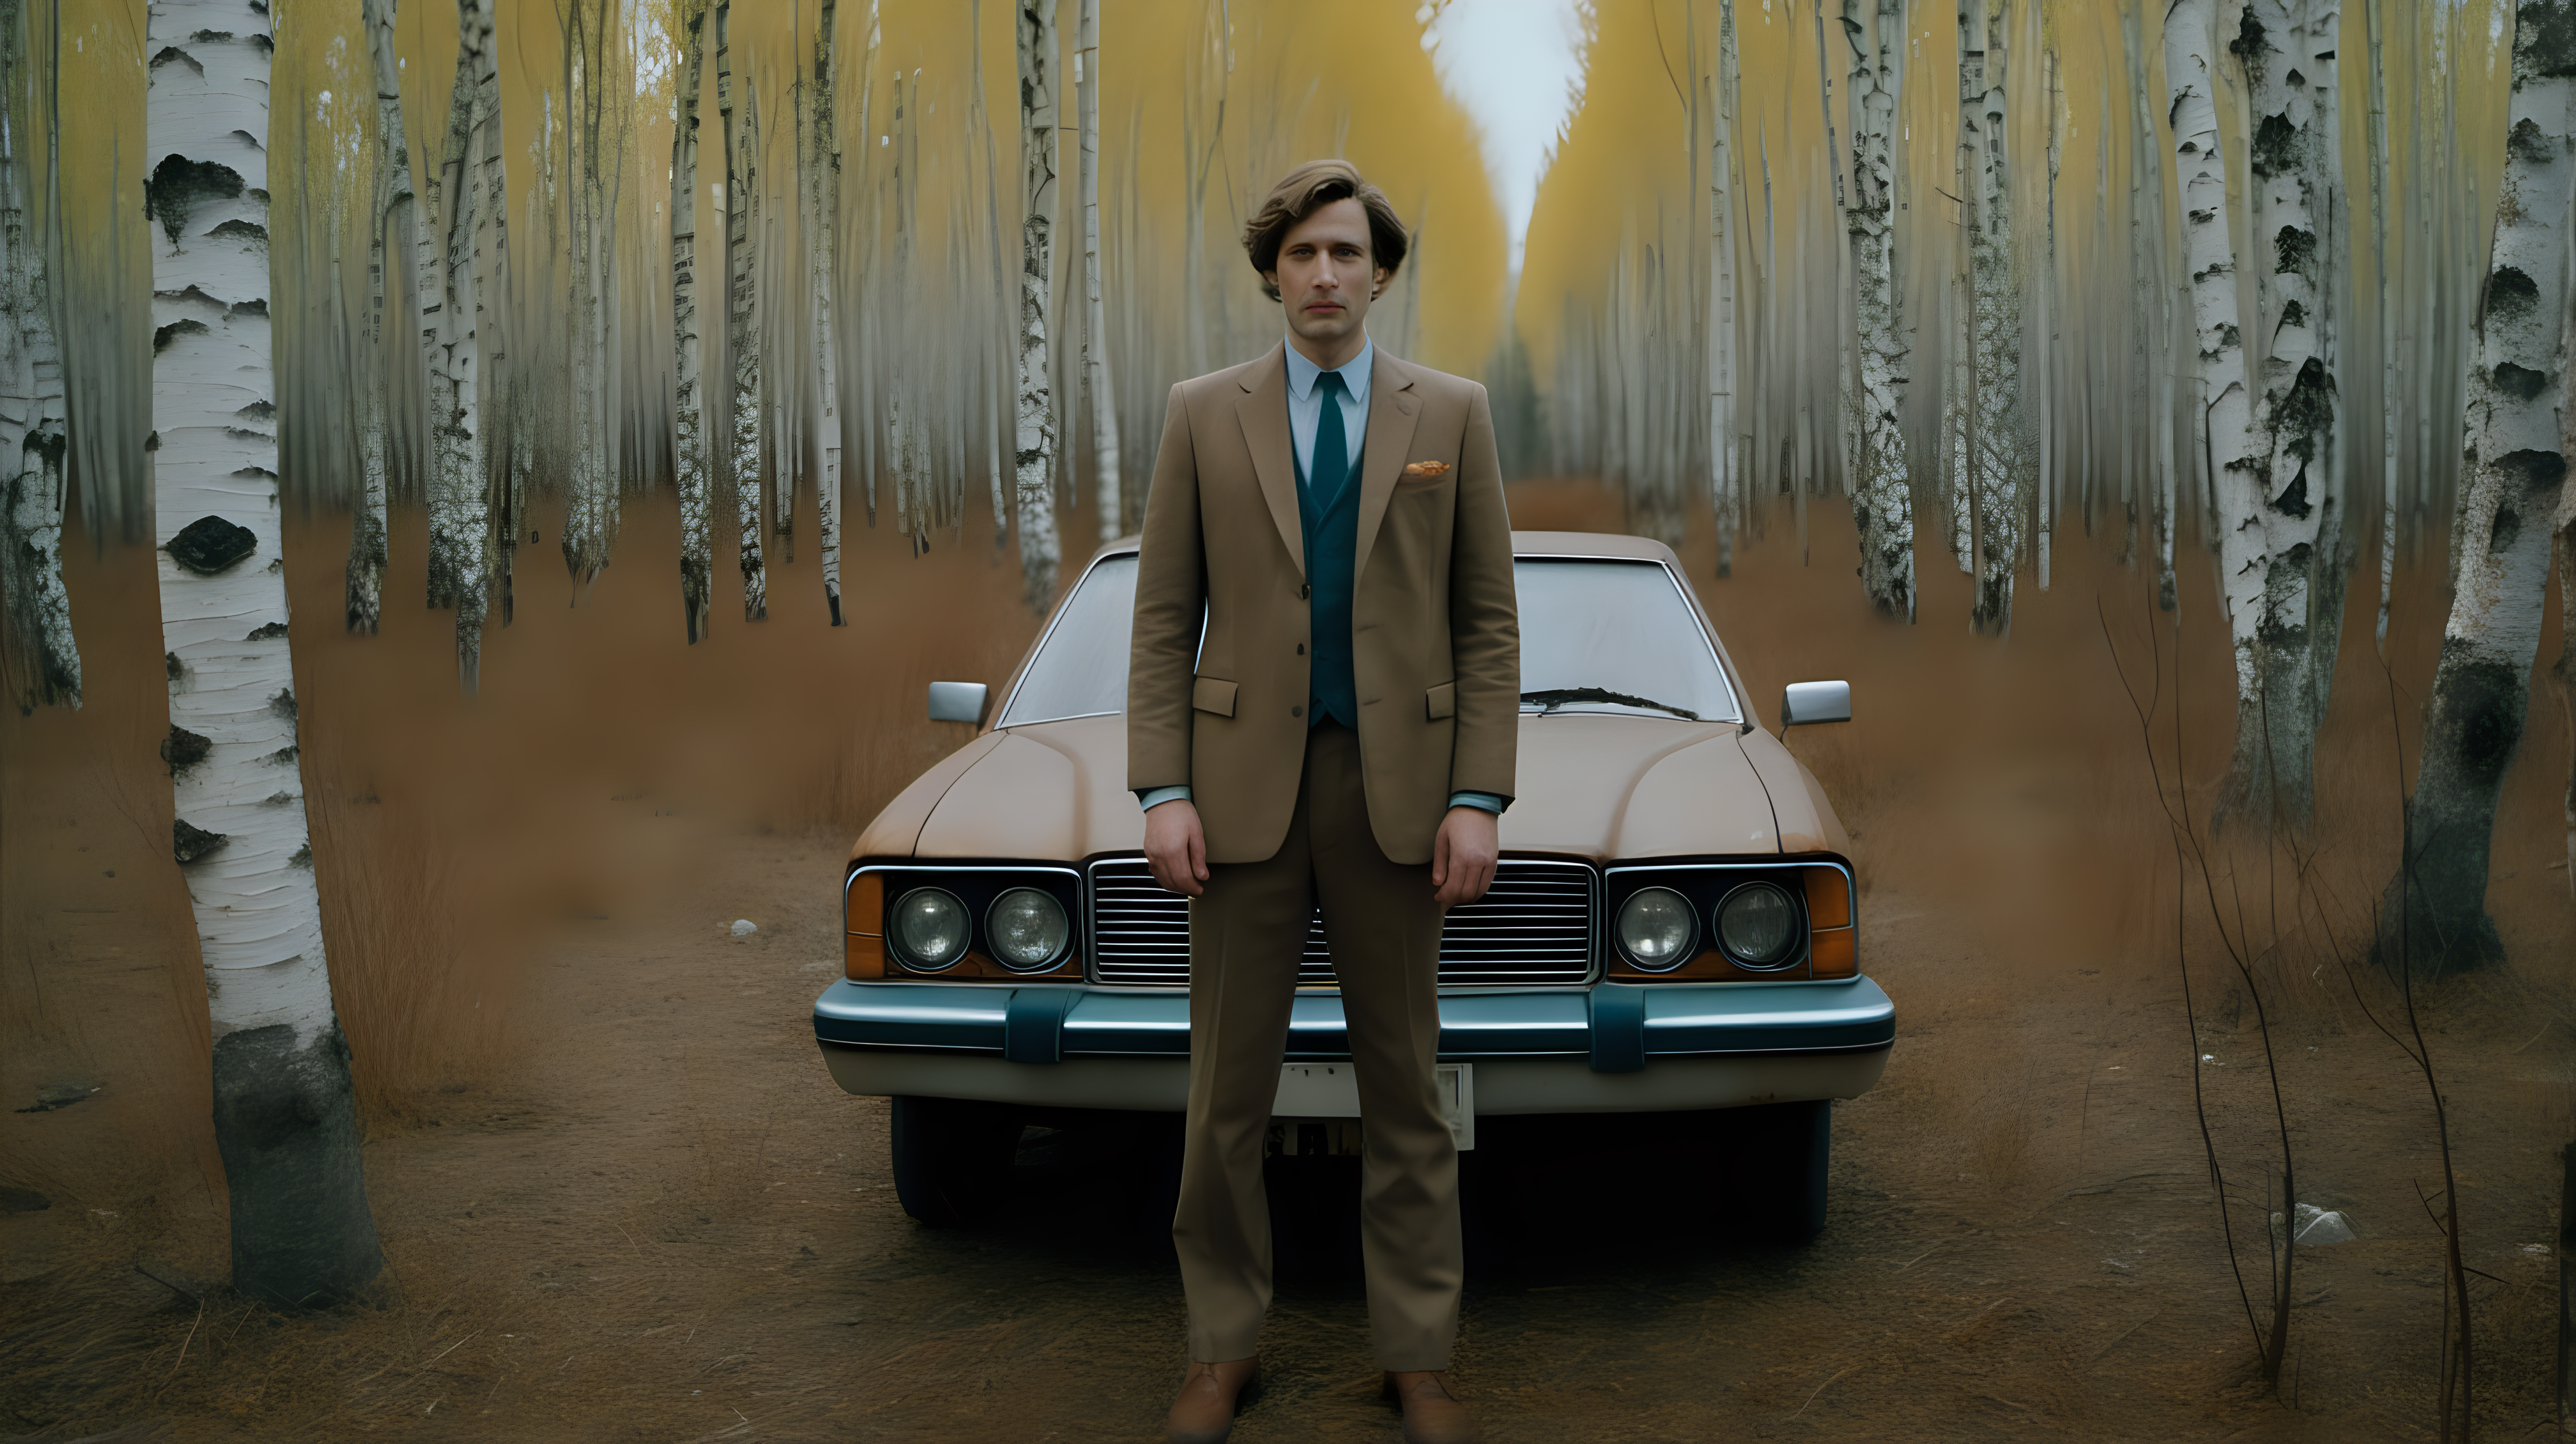 high quality cinematic medium wide -shot portrait of a man standing in a birch forest, looking into camera, wearing a suit from the early 1980s, there is a rusted, dilapidated old car far in the background, in the style of a wes anderson film